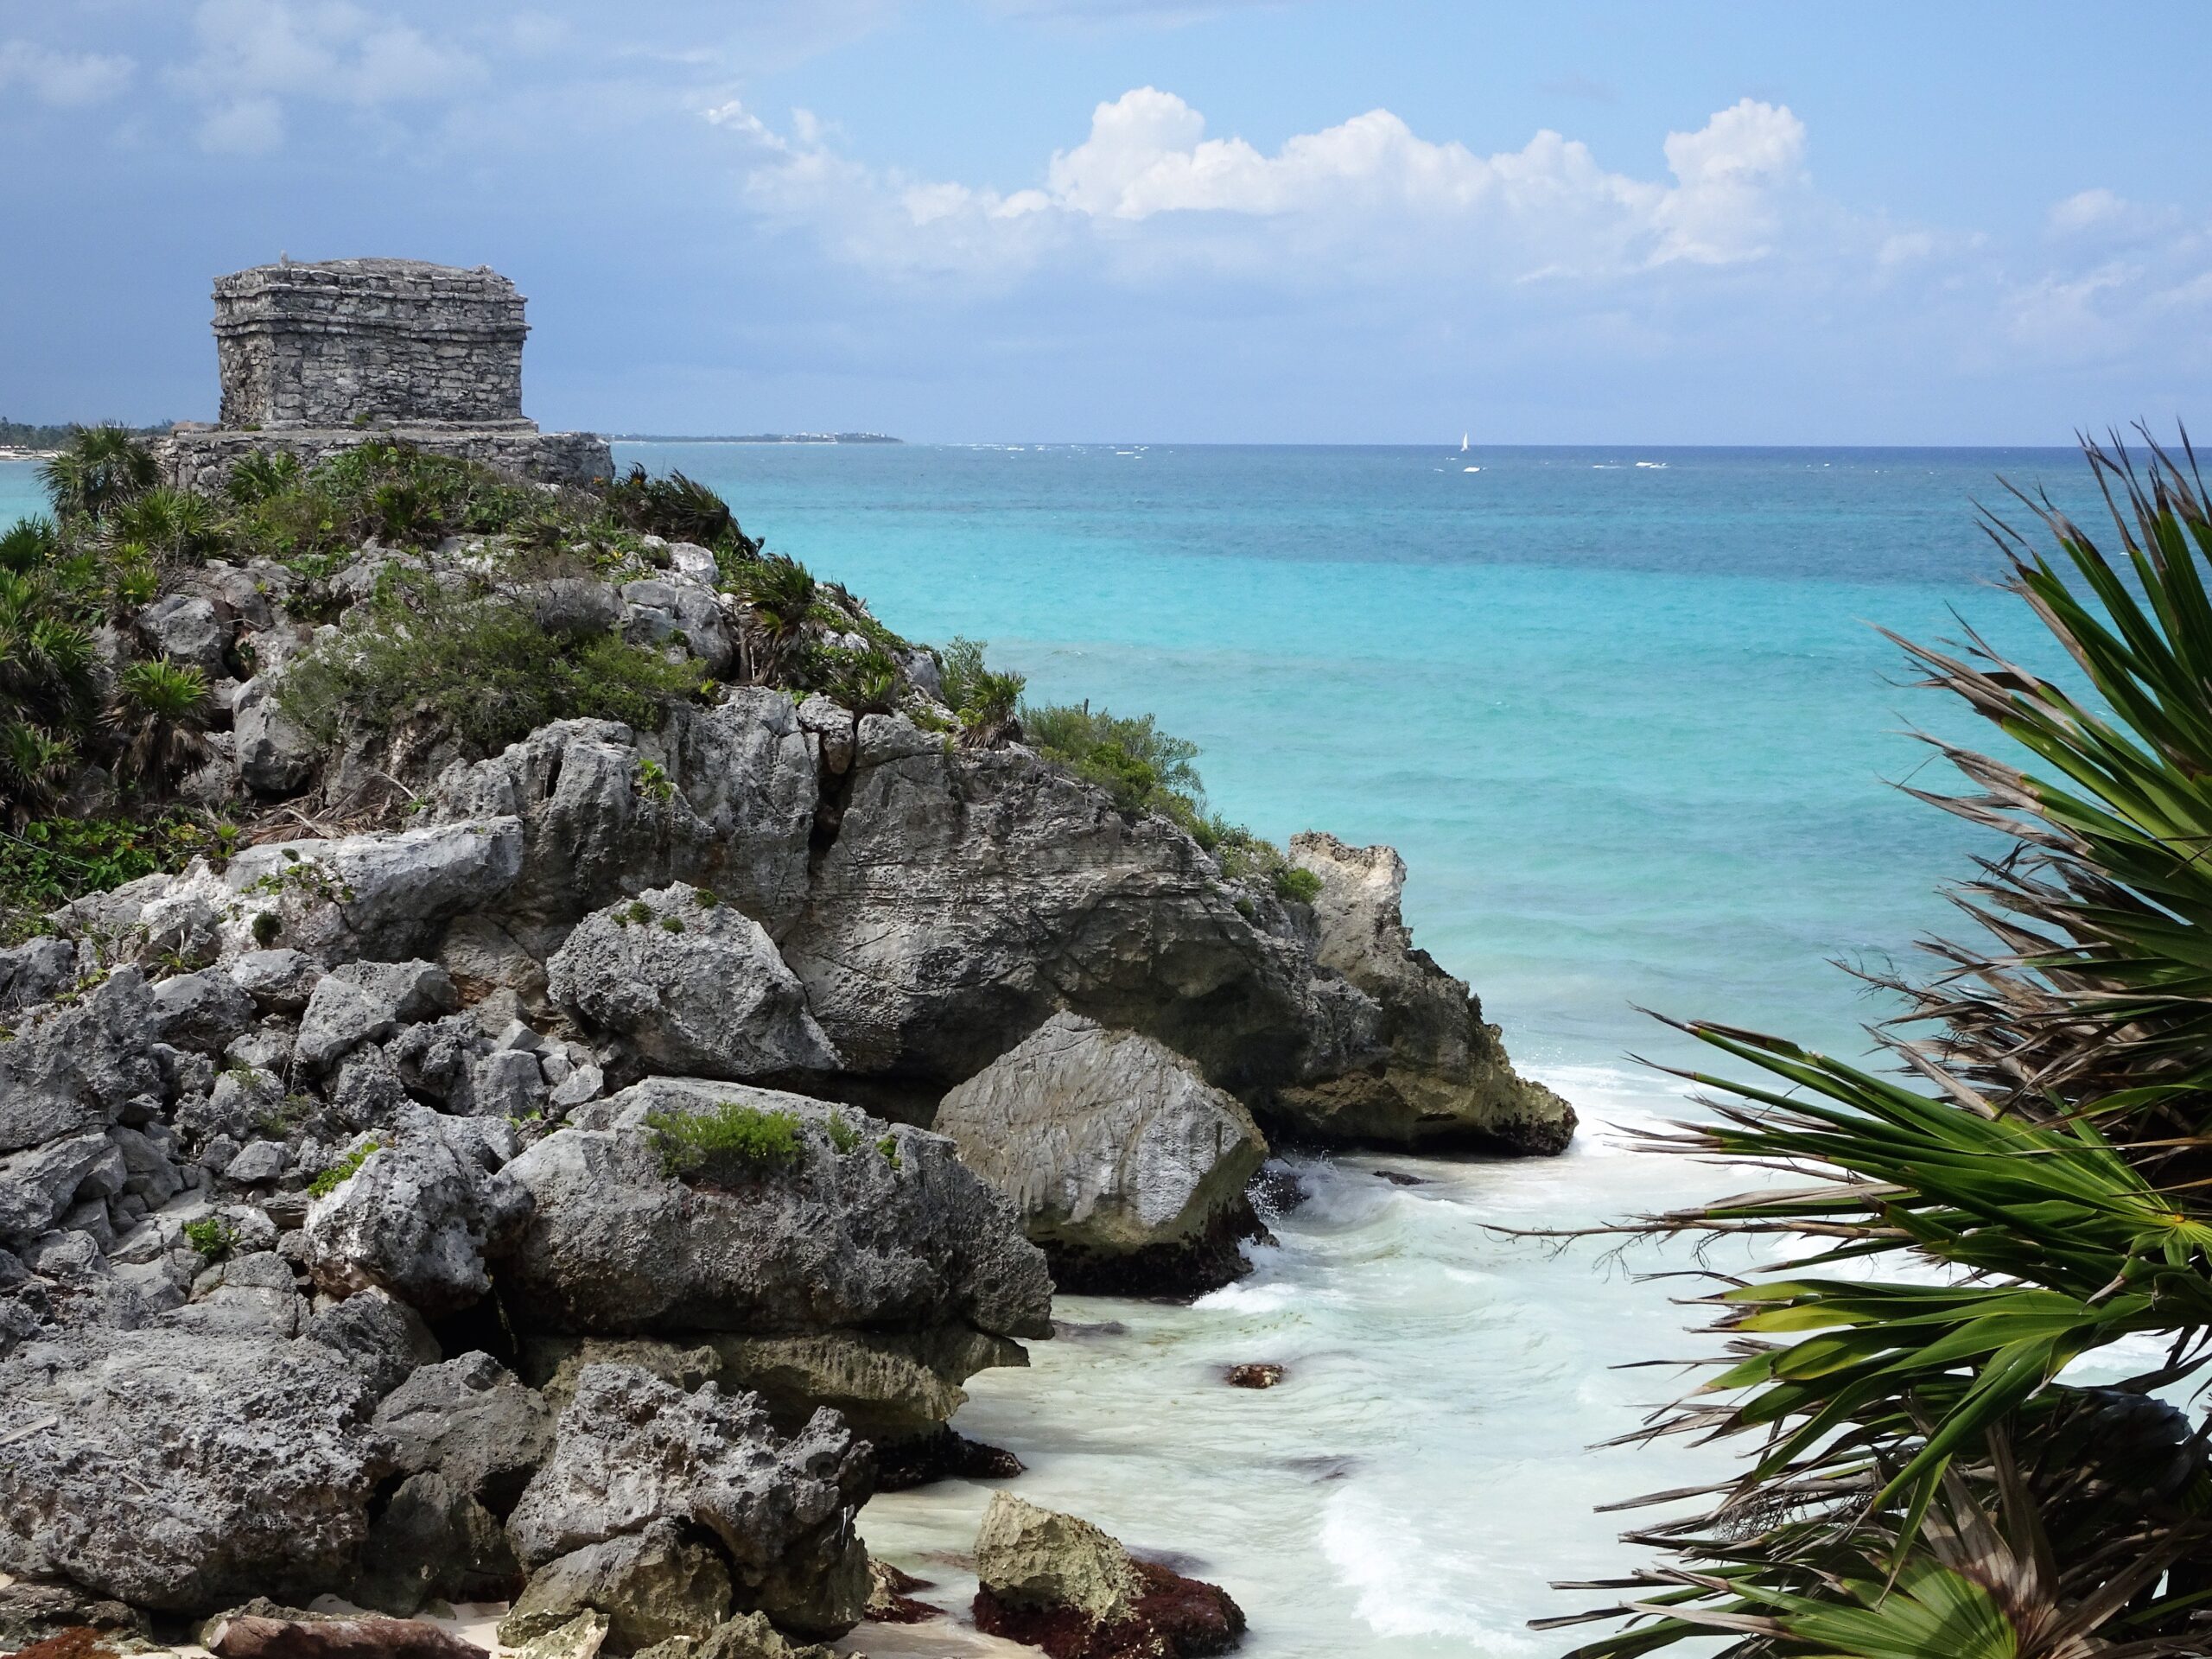 Mexico is a popular vacation spot, but especially for vacationers that want to escape the cold.
Pictured: The rocky Mexican coast with turquoise waters and green shrubbery 